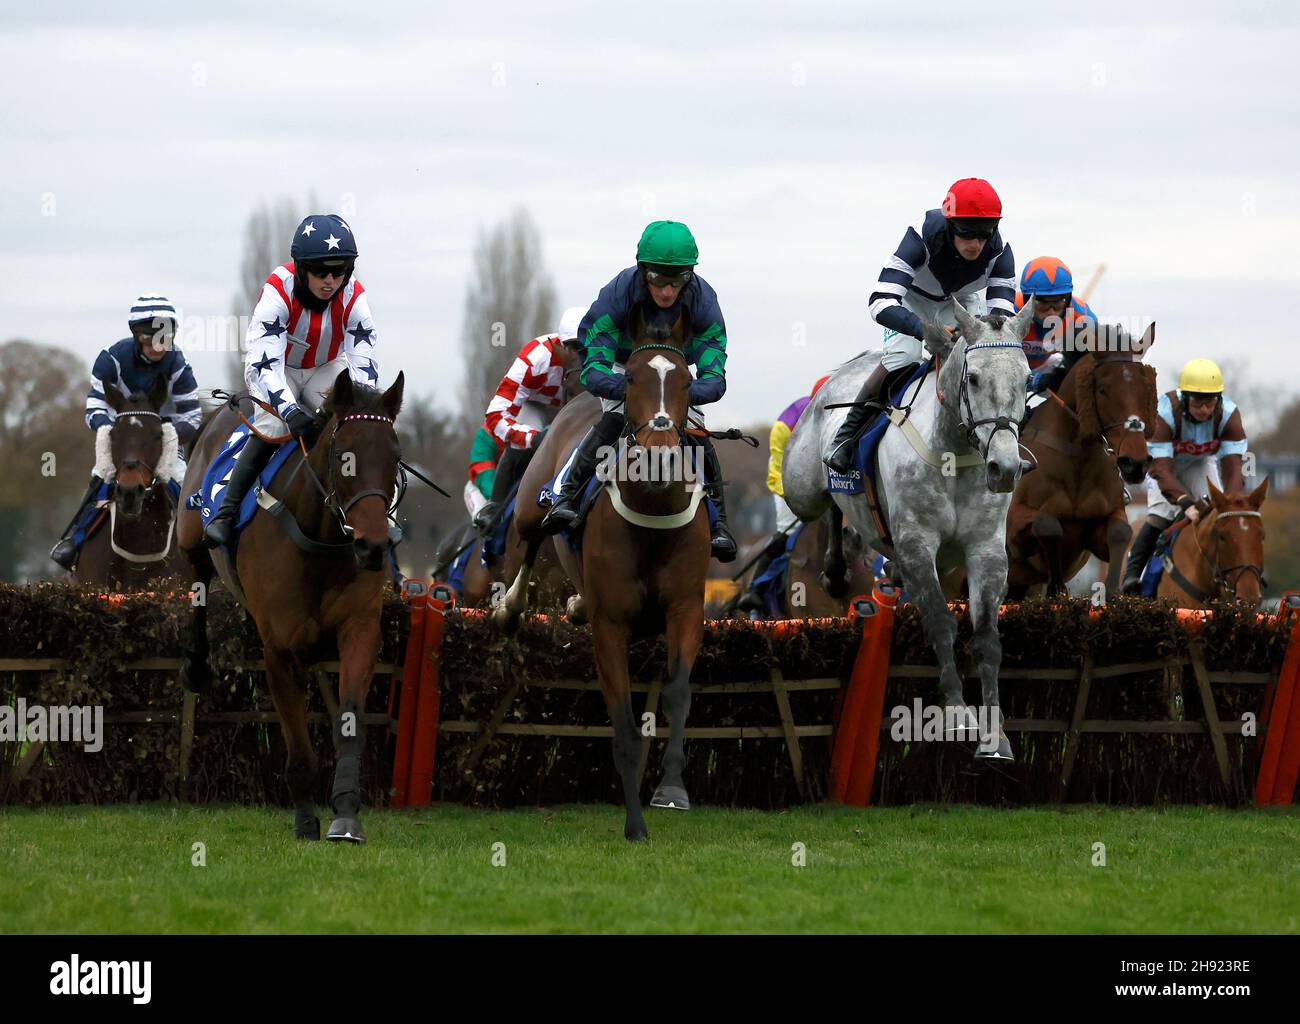 Charlie Hammond riding South Terrace, Daryl Jacob riding The Cob and Thomas Doggrell riding Al Dancer in the Pertemps Network Handicap Hurdle during the Betfair Tingle Creek Festival at Sandown Park Racecourse, Esher. Picture date: Friday December 3, 2021. Stock Photo